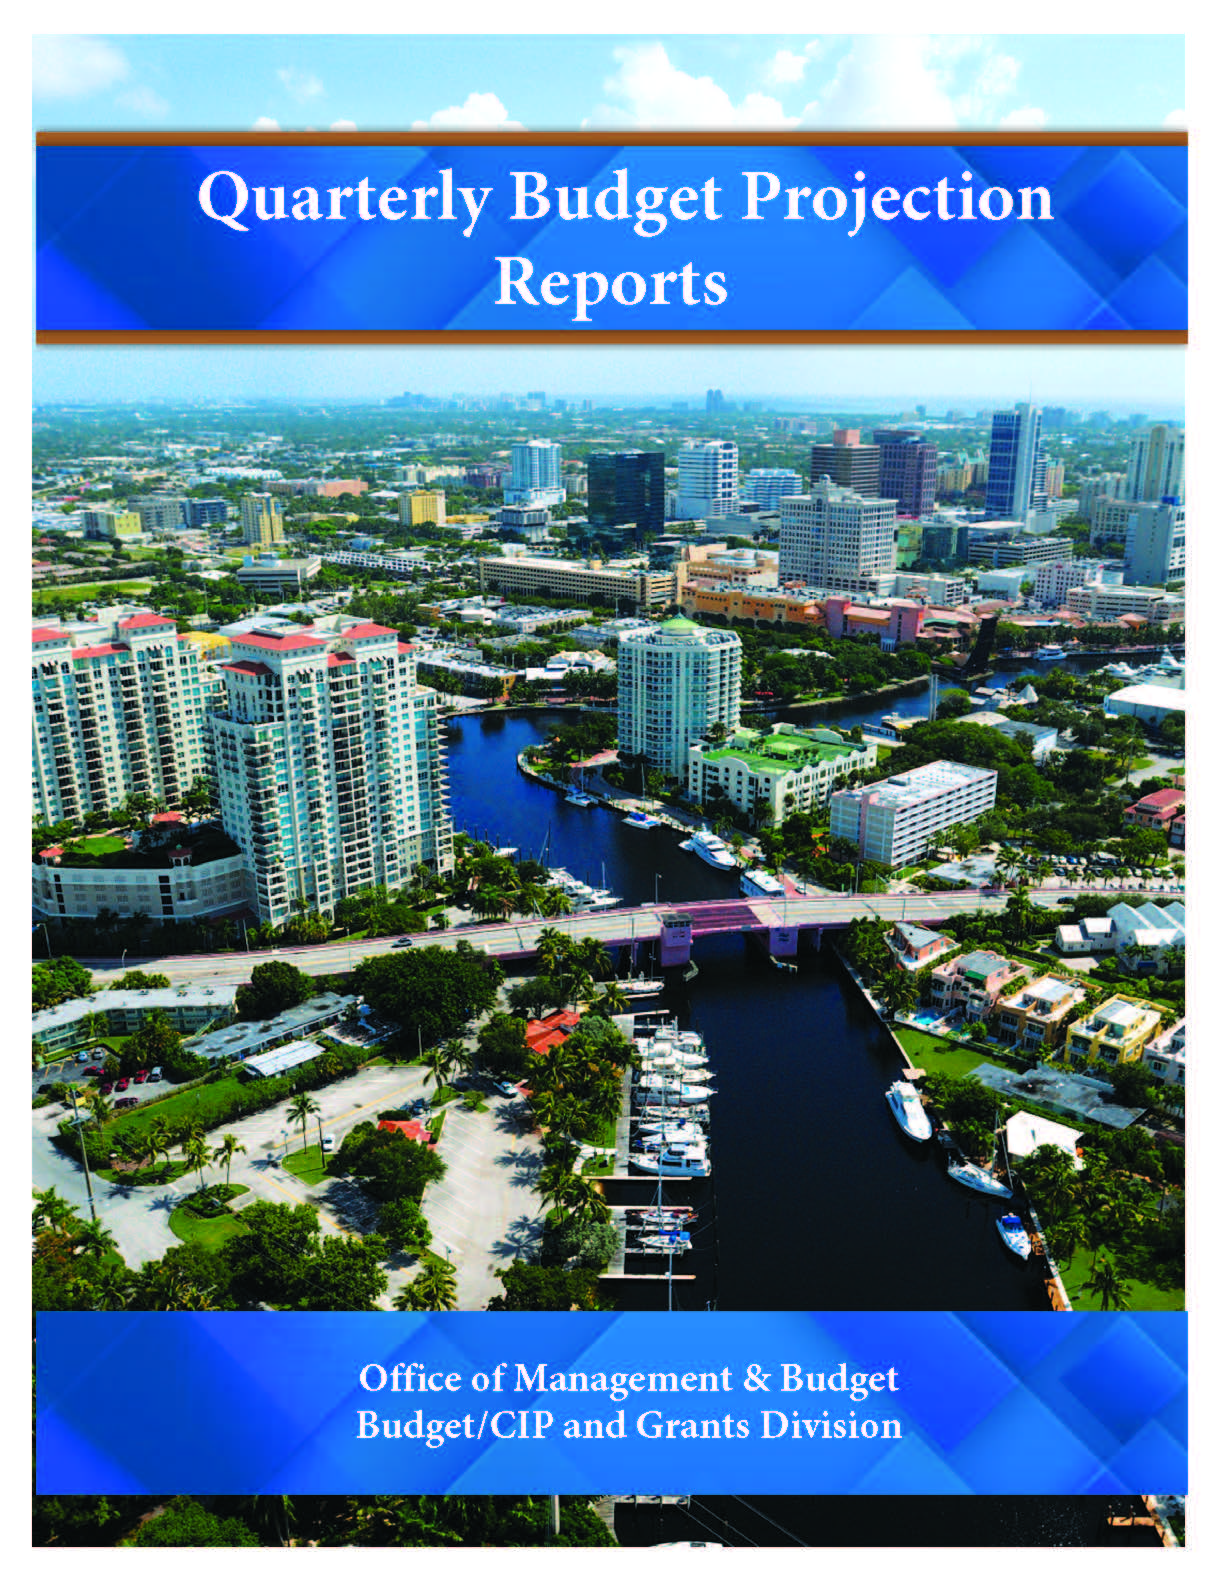 Pages from Second Quarter Fiscal Year 2021 Budget Projection Report